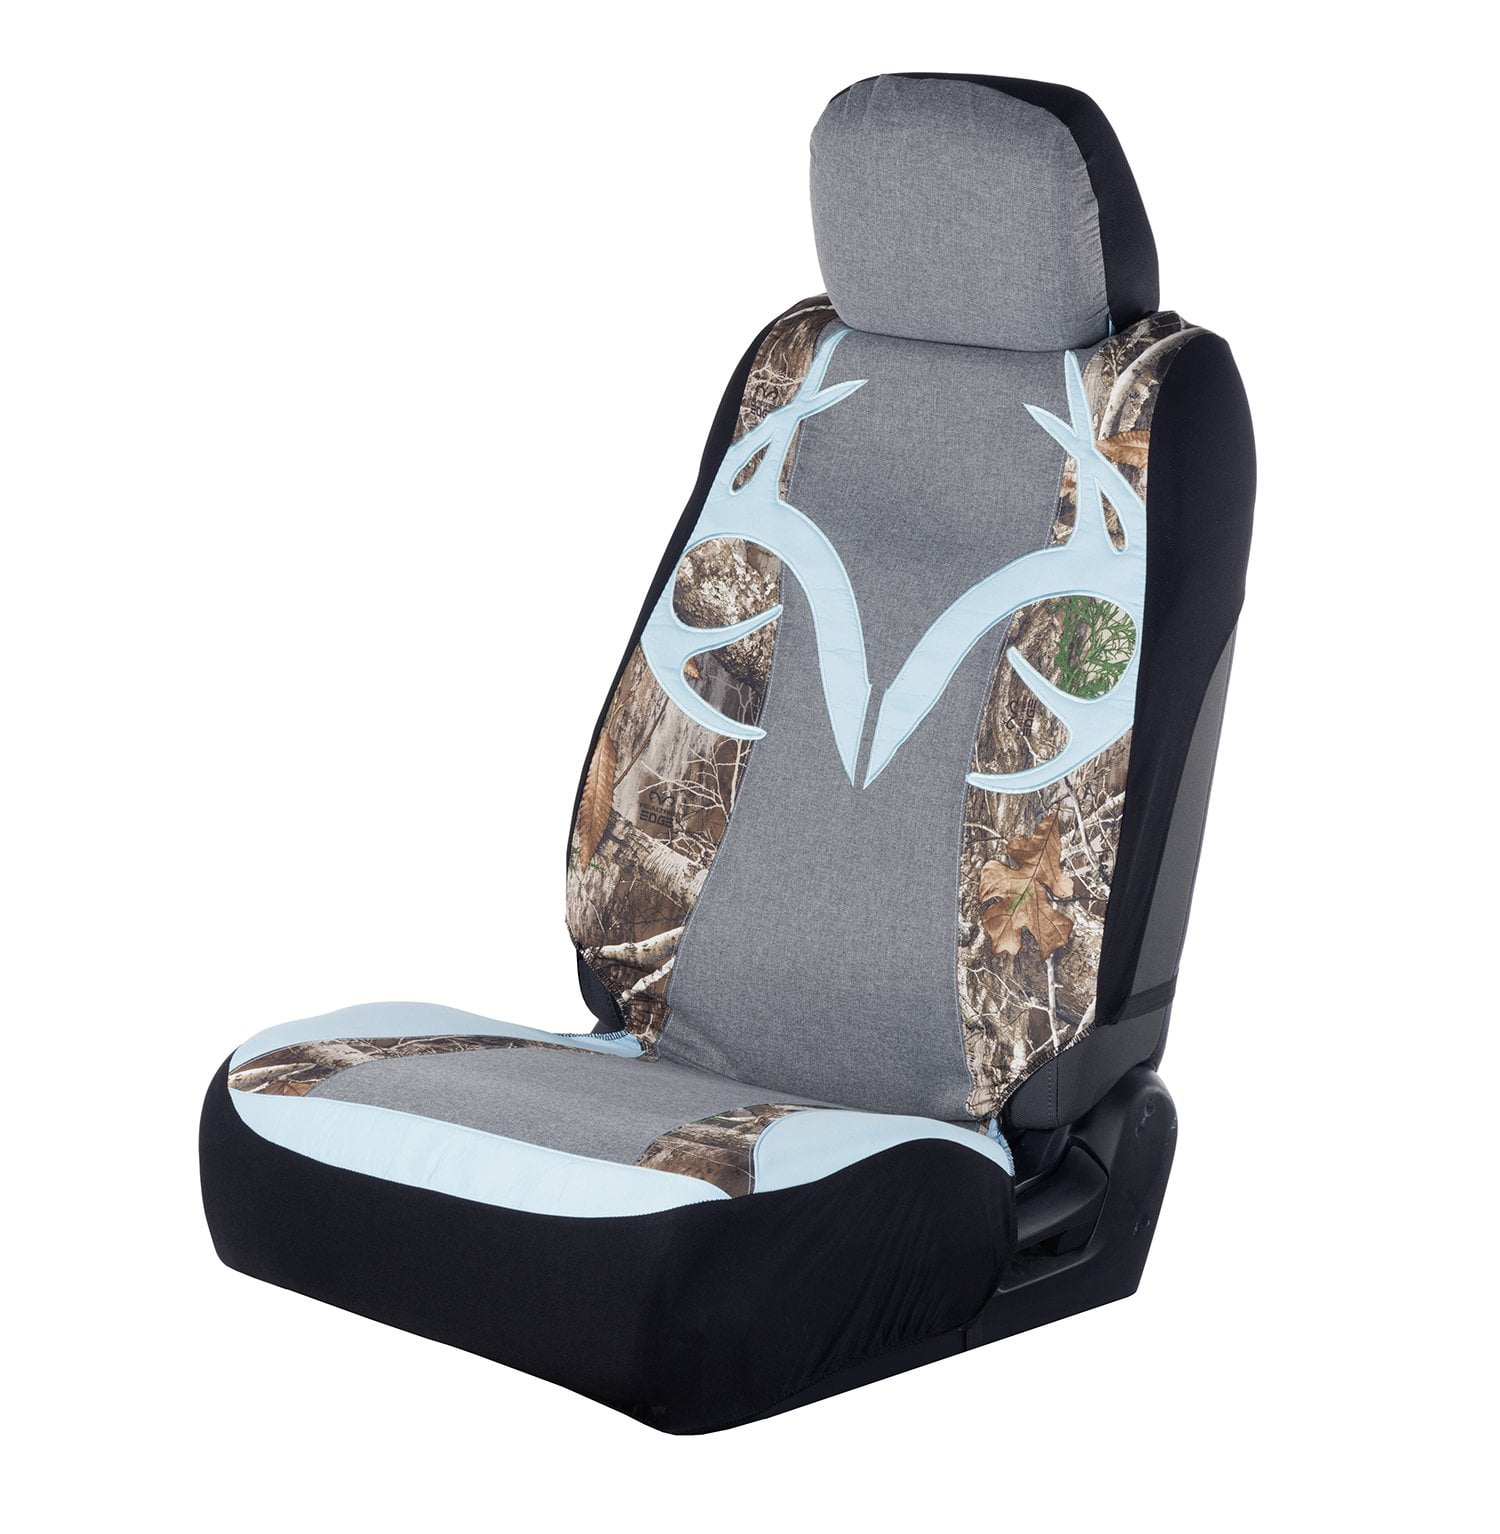 WINCR Realtree Camo Wallpapers Anti-Skid and Waterproof Car Seat Cover Fits Most Cars Trucks and SUVs 